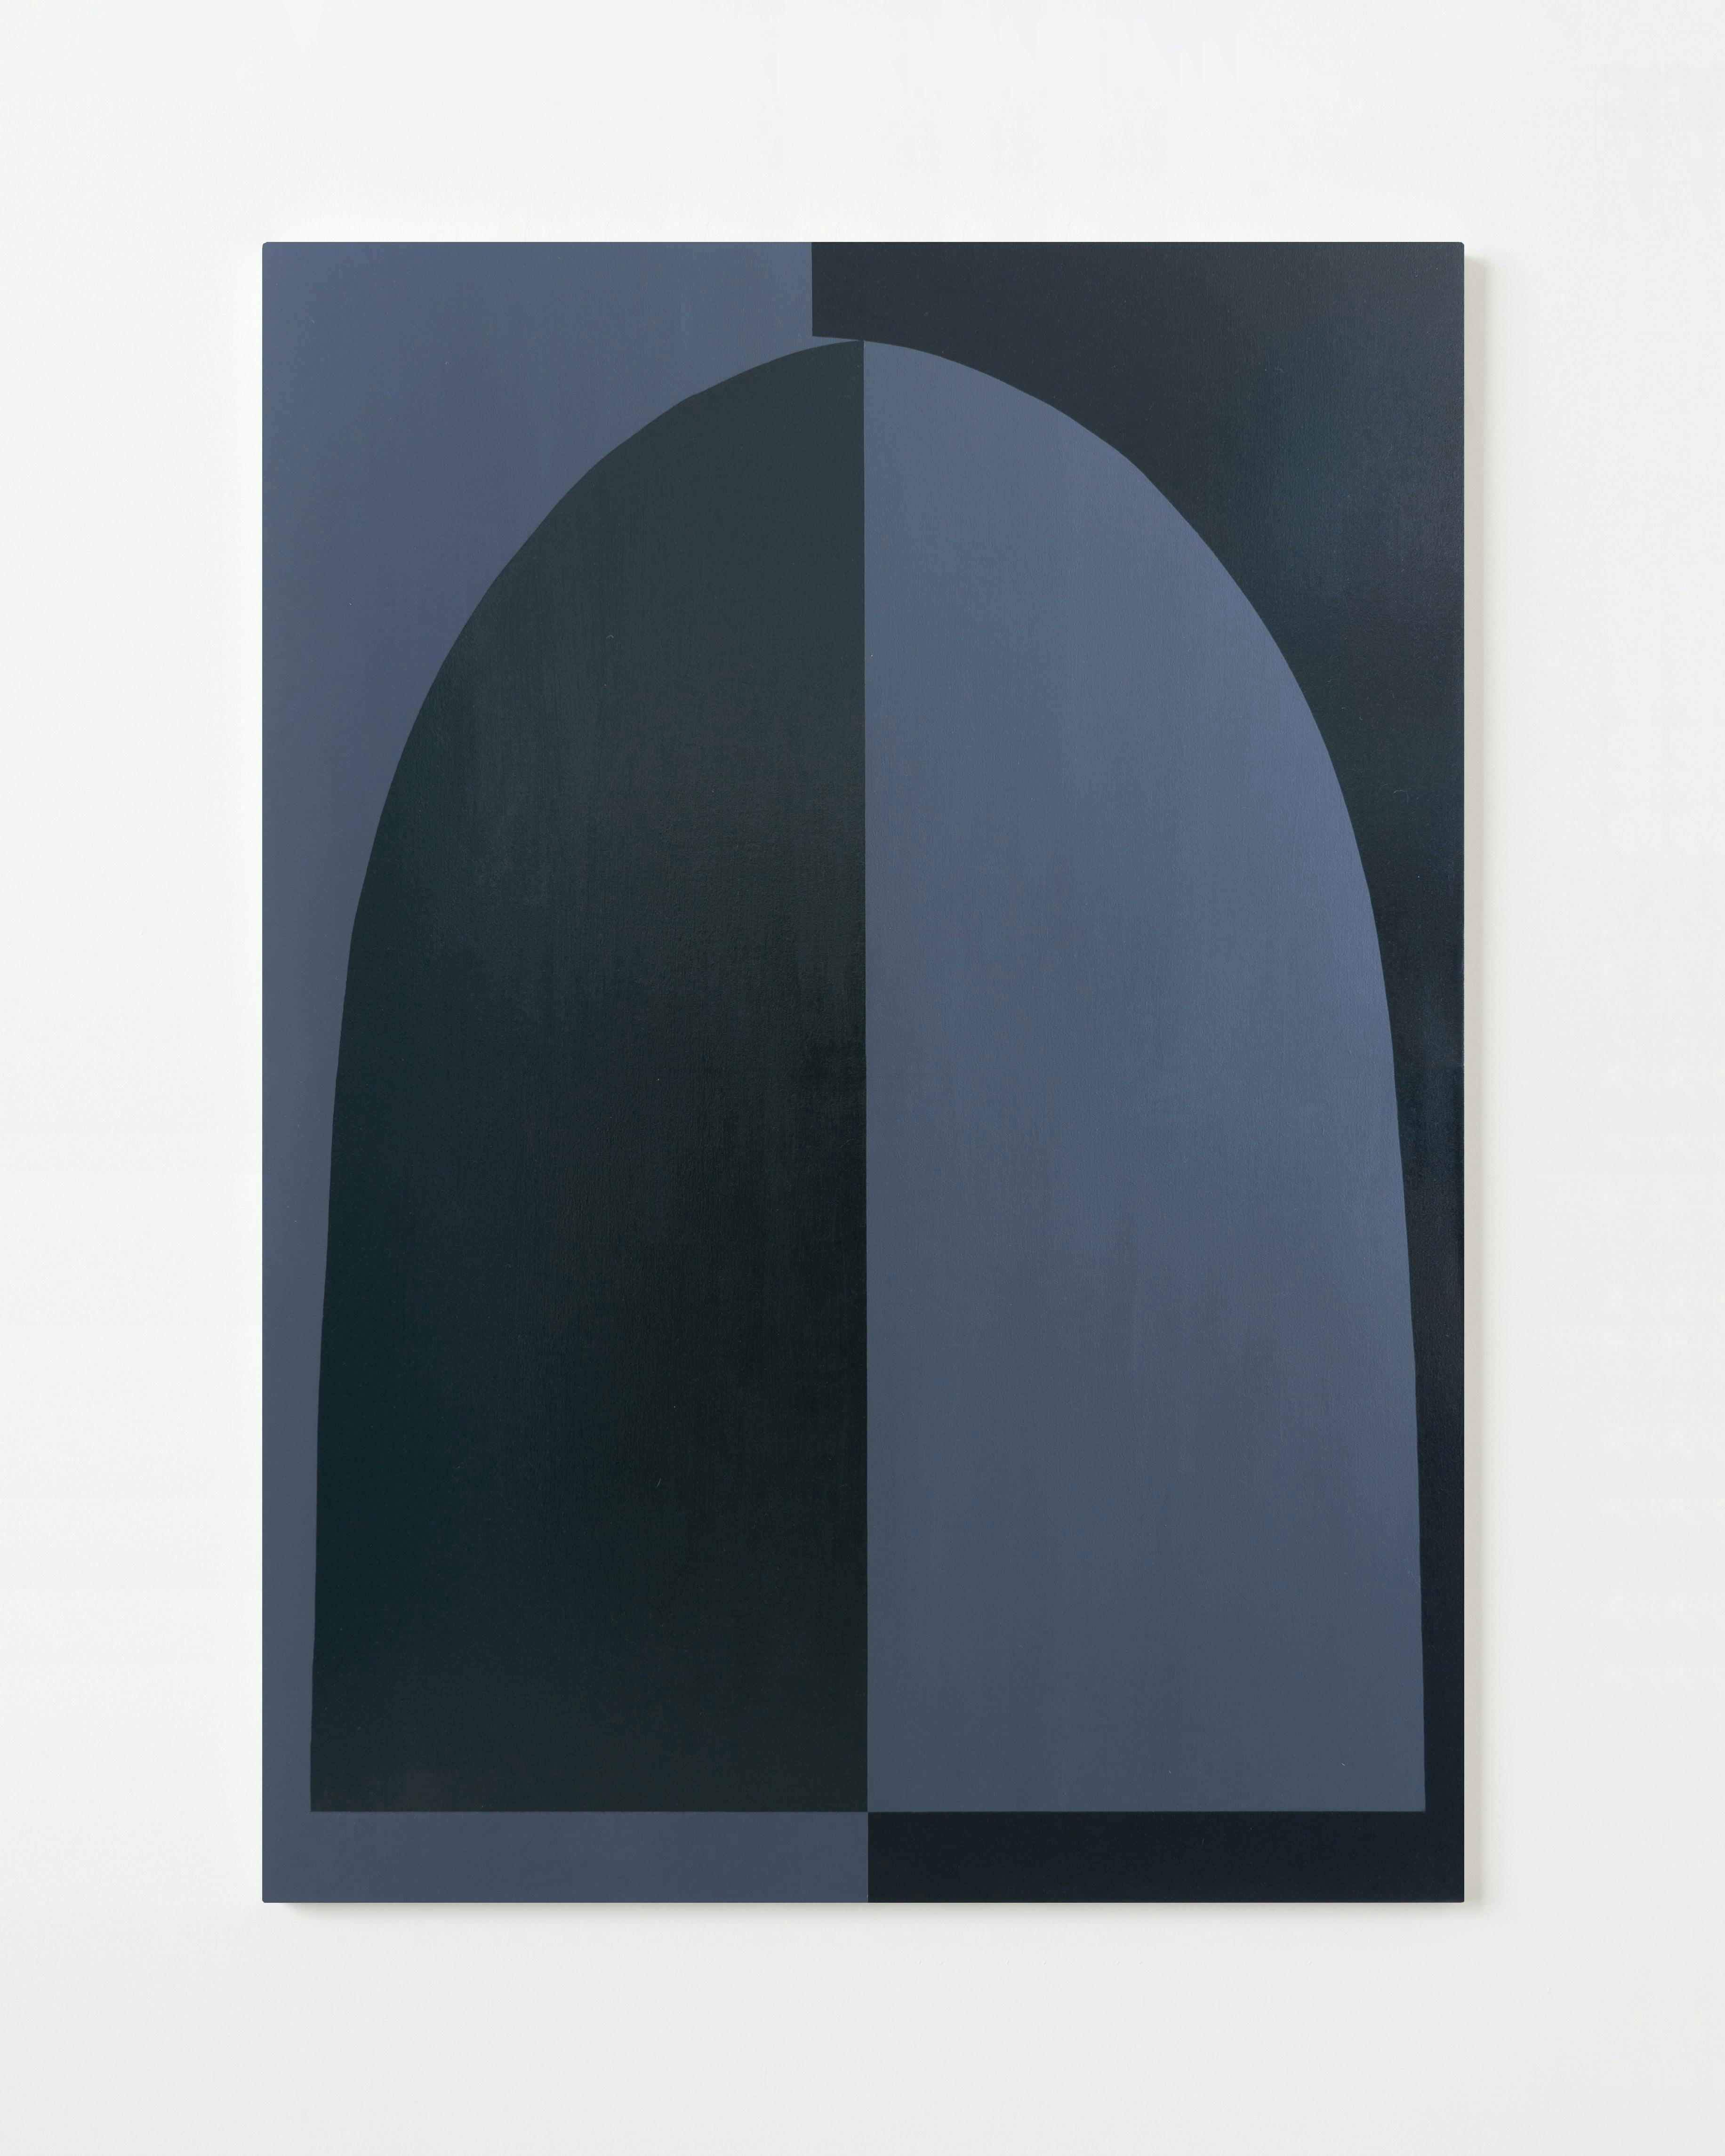 Painting by Aschely Vaughan Cone titled "Double Black Arch Doublet in Green Light".